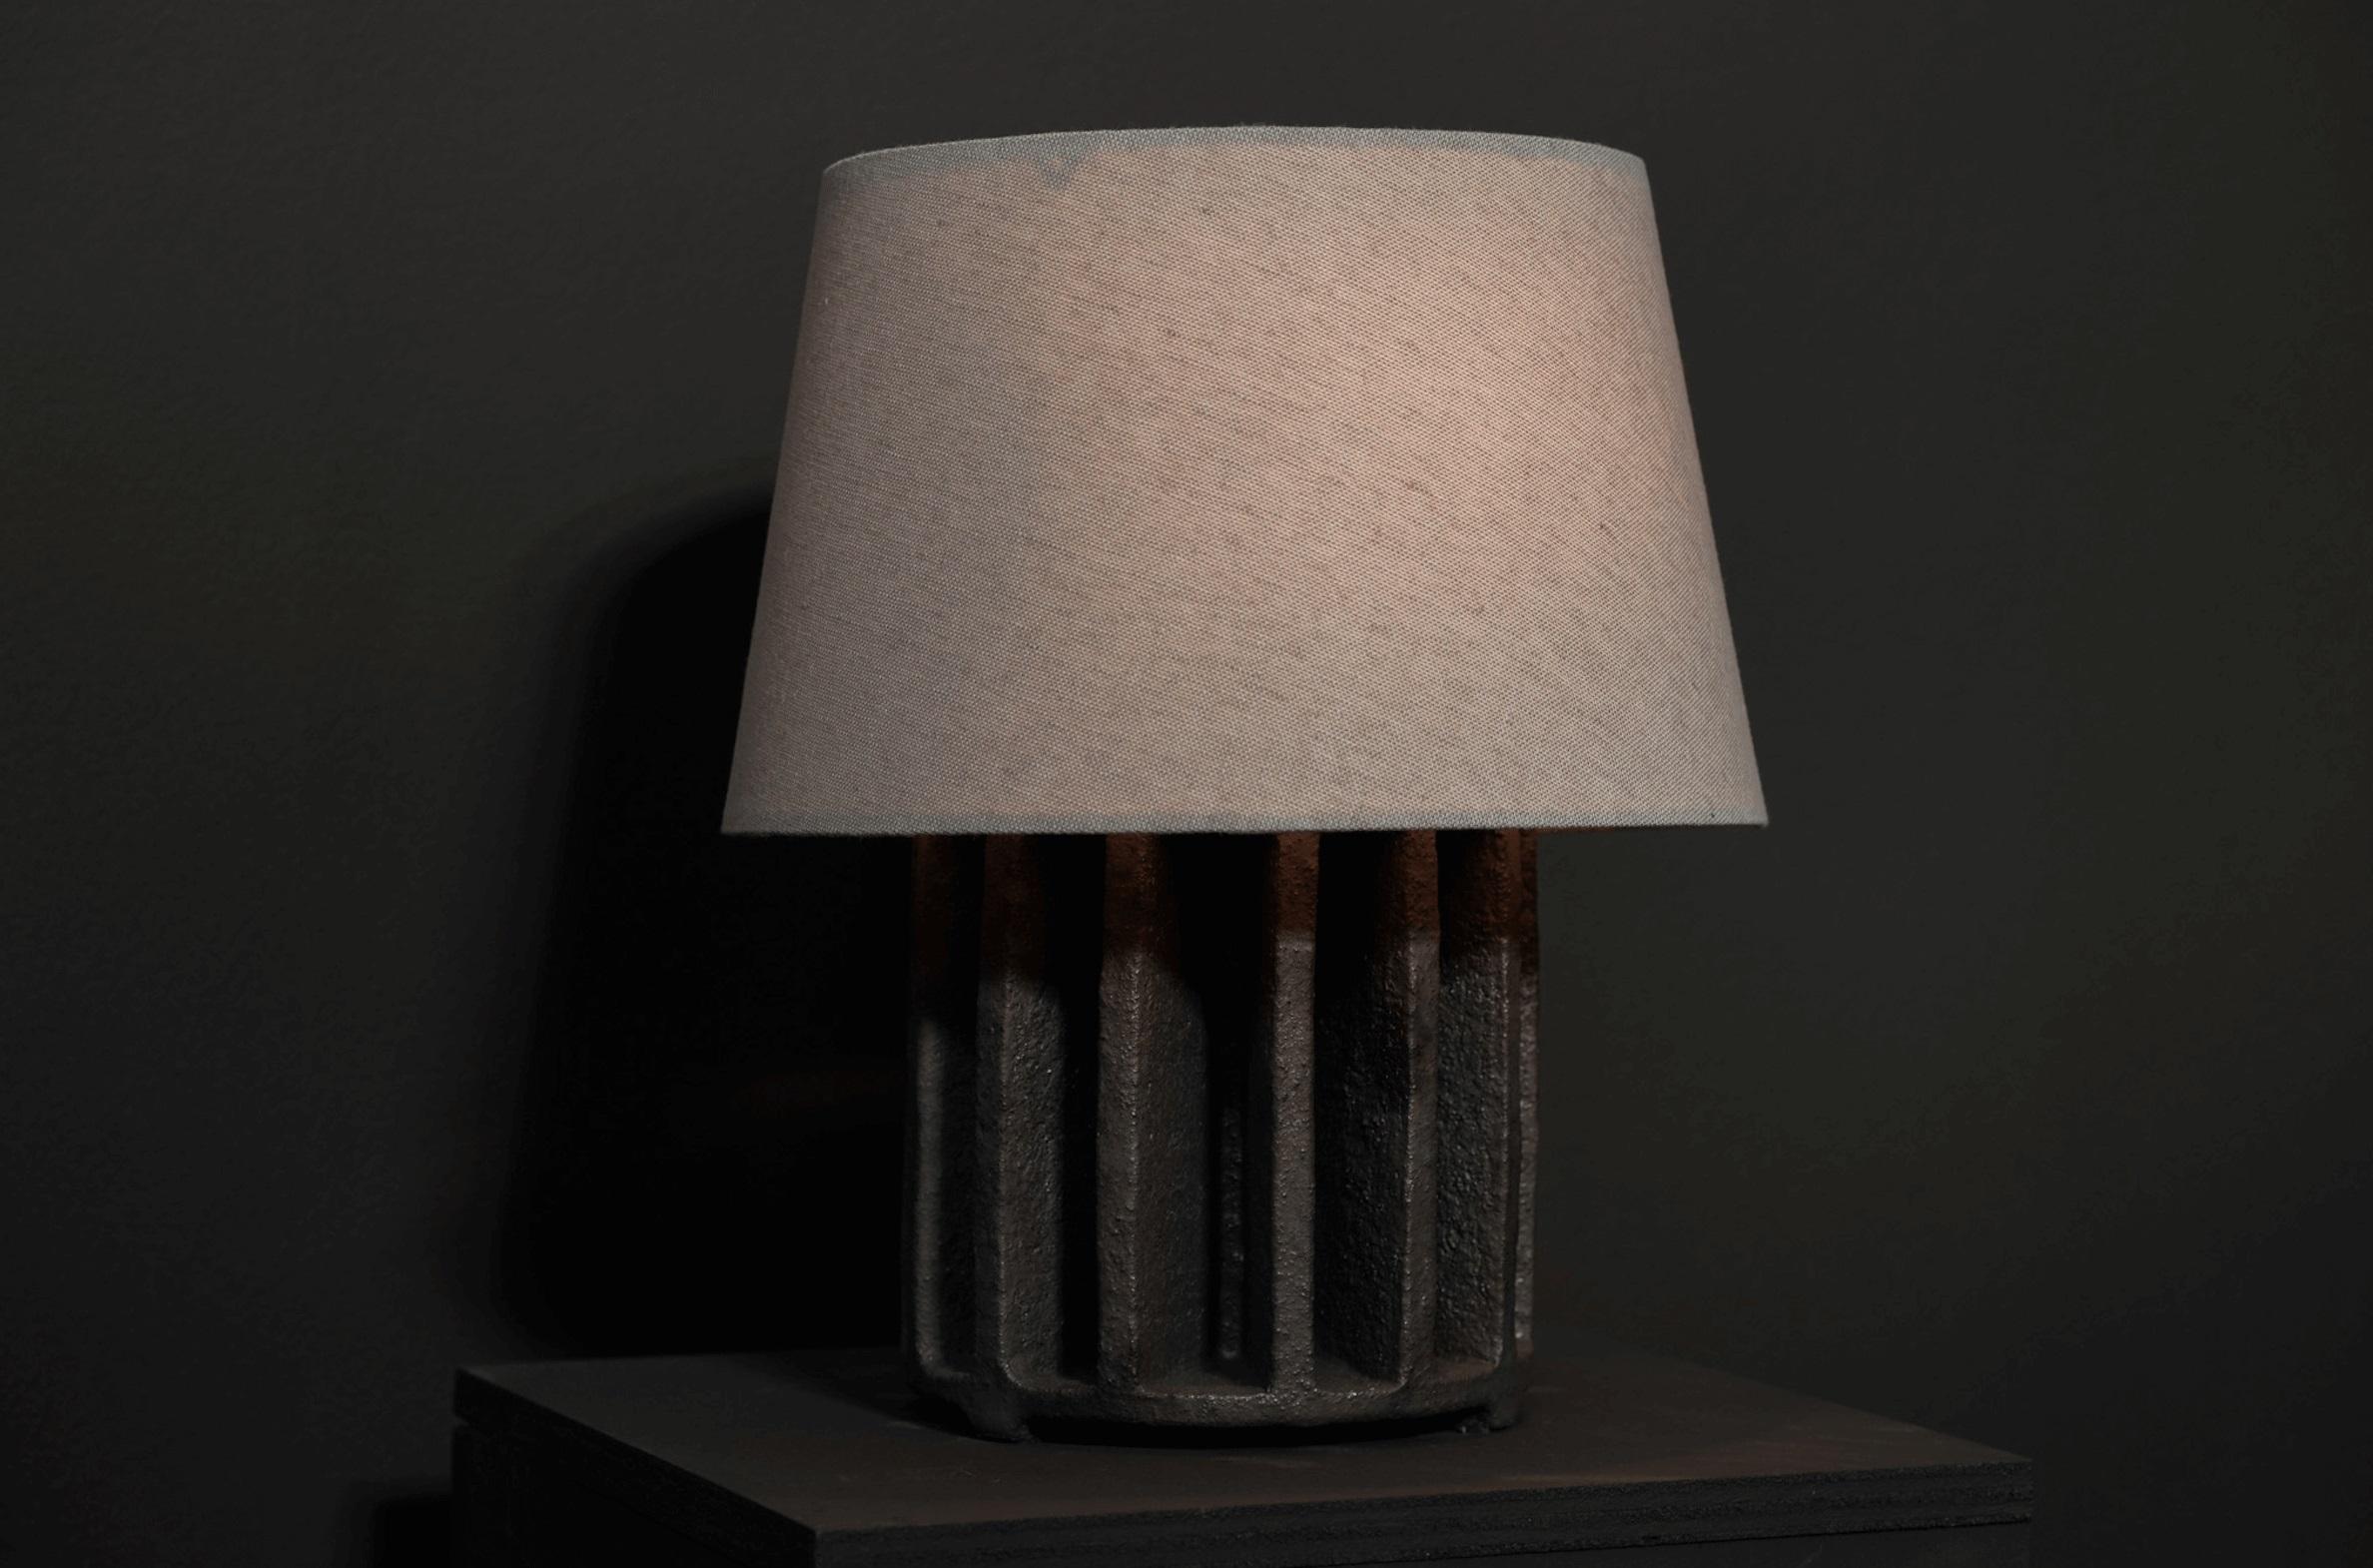 Materials: Ceramic
Origin: California
Dimensions: 6.25” Diameter Base X OAH 12”, Shade 10.25” Diameter
Quantity: 1
Type: Table Lamp

At STUDIO BALESTRA, we take pride in offering uniquely handmade ceramic lighting, meticulously crafted by skilled